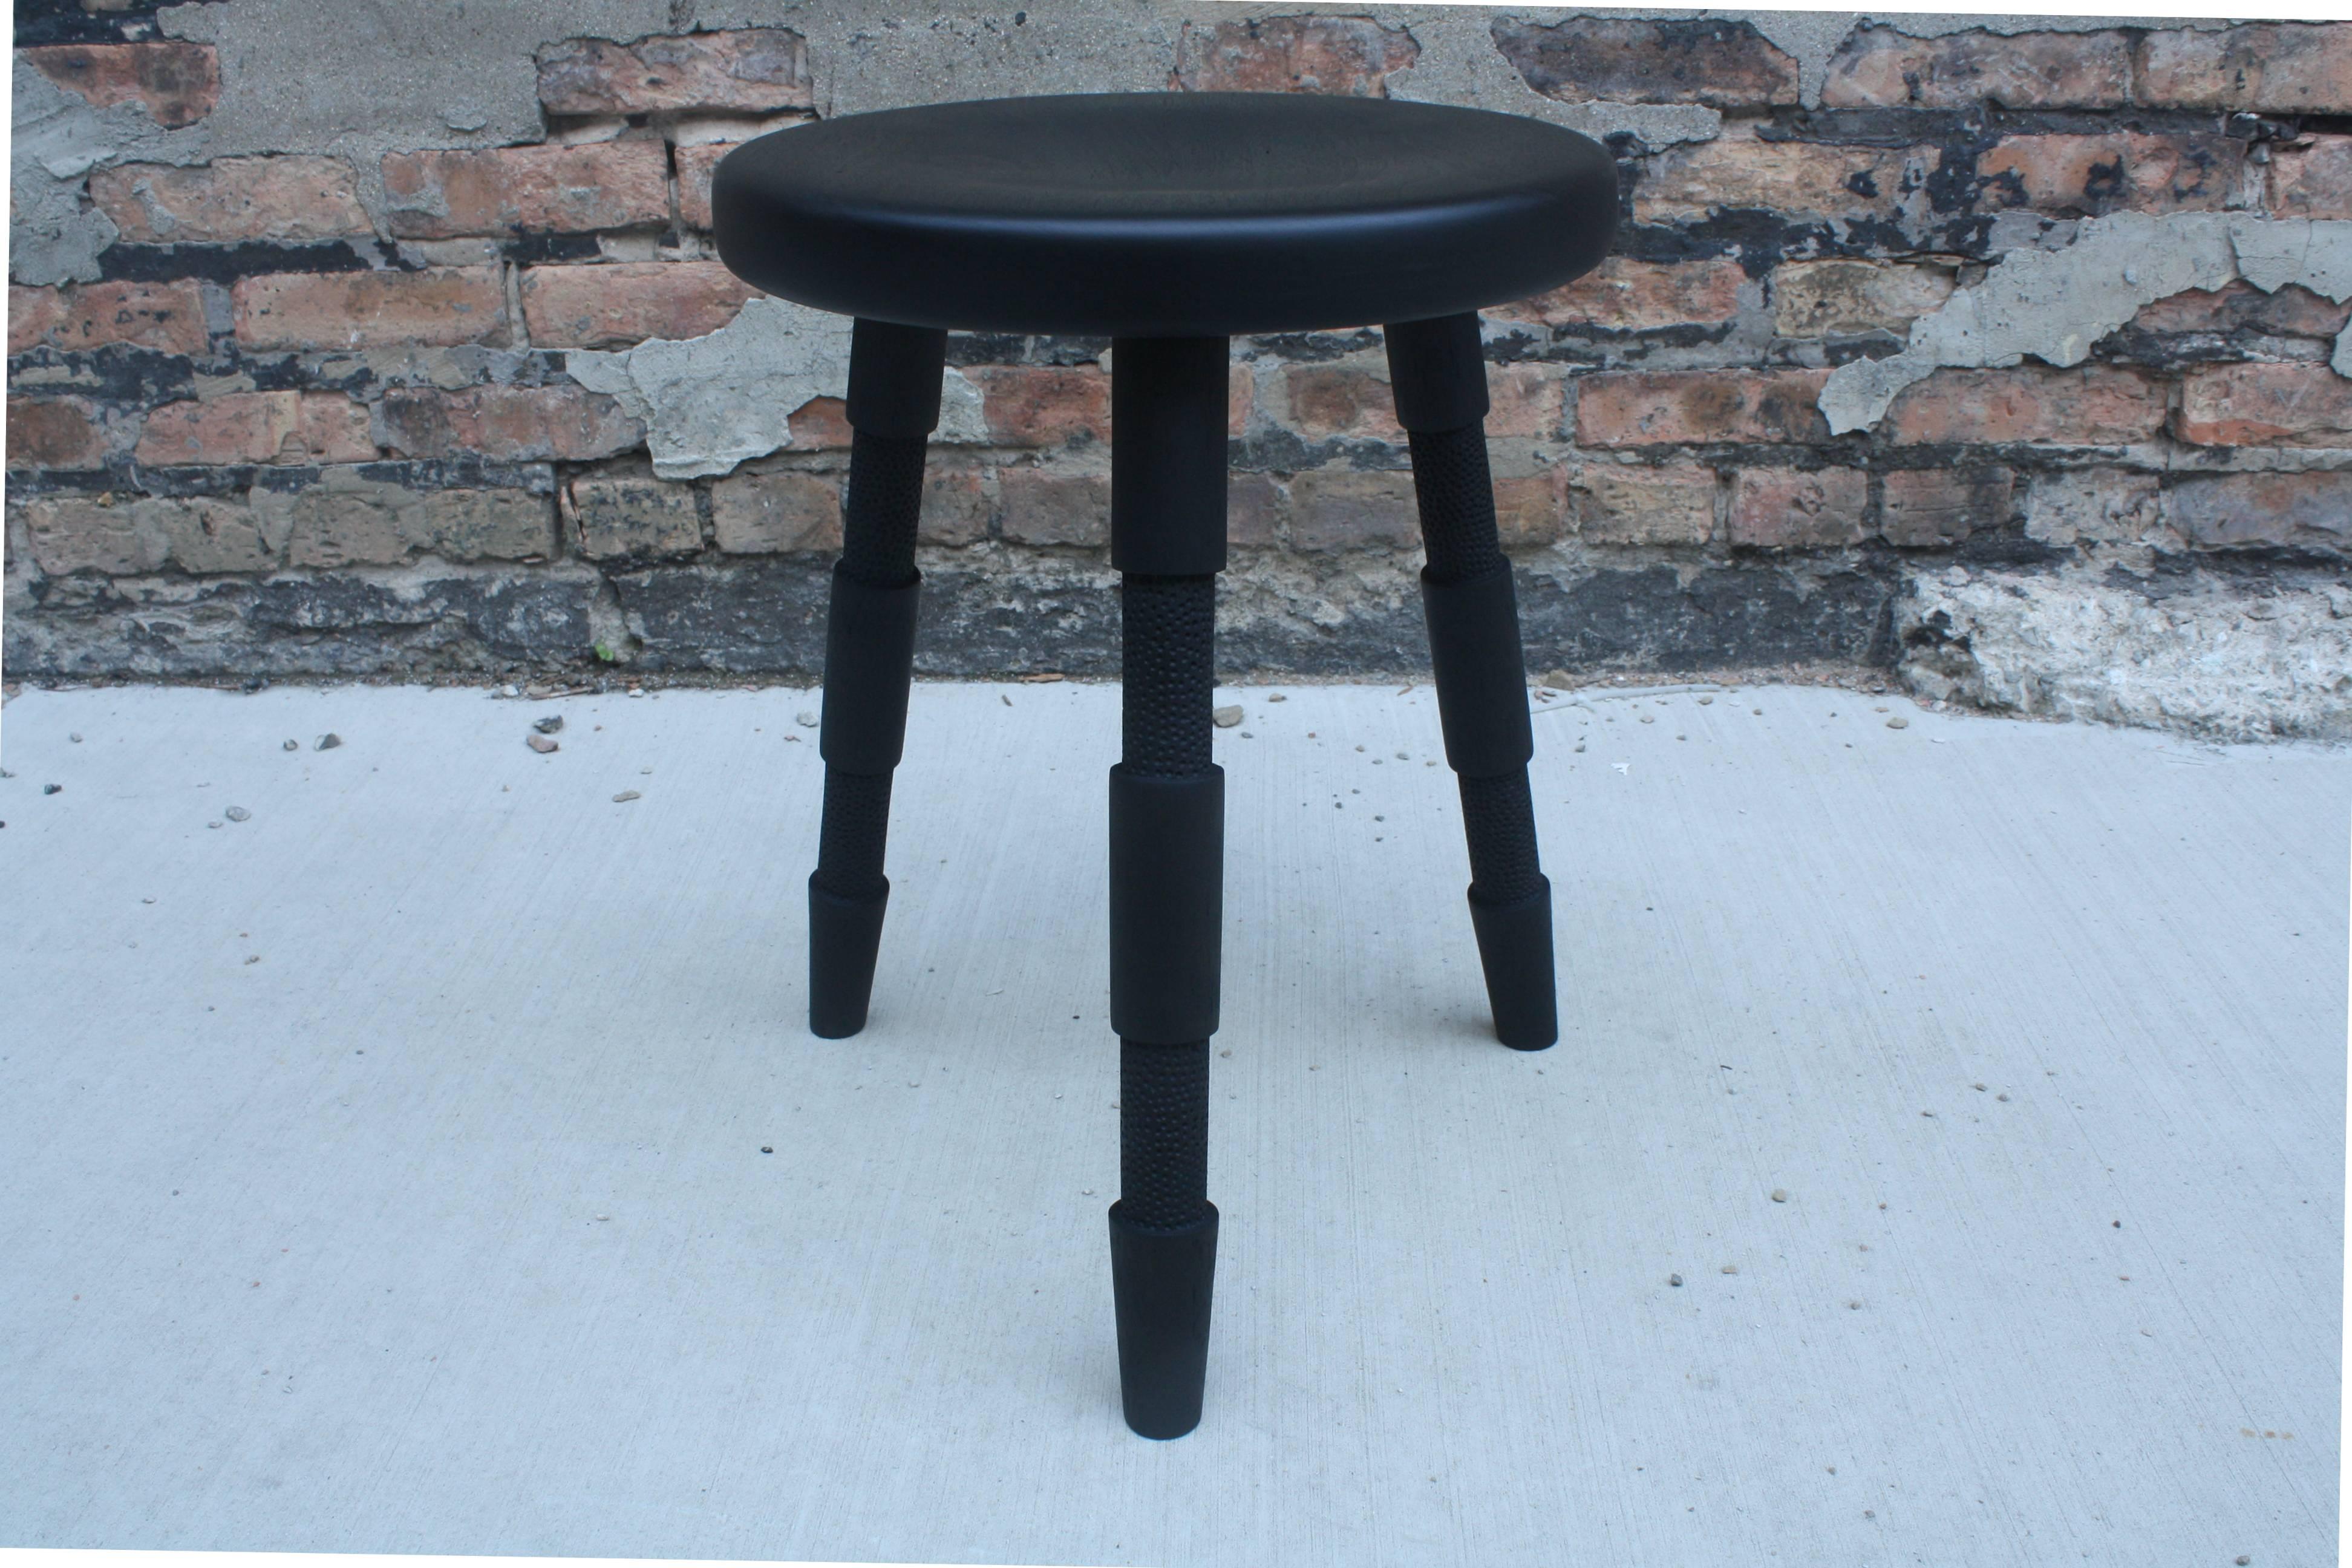 Contemporary Saddle, Handmade Wood Stool With Textured Legs and a Carved Seat For Sale